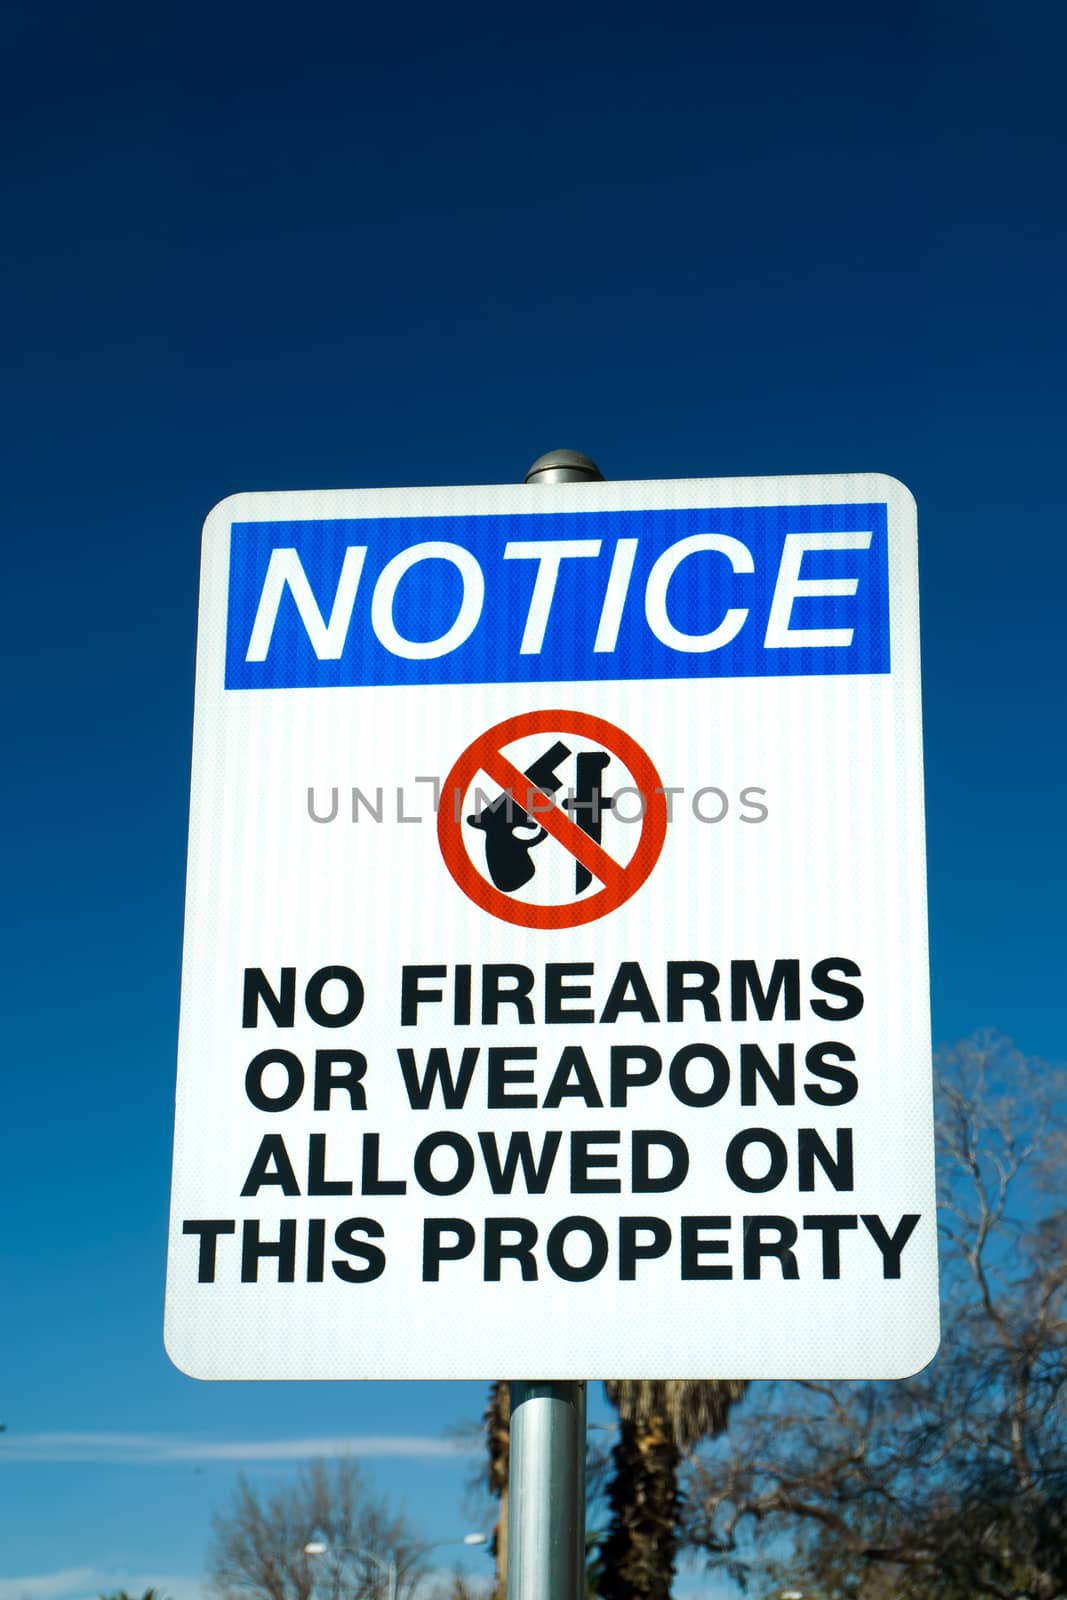 No firearms or weapons with red circle sign.